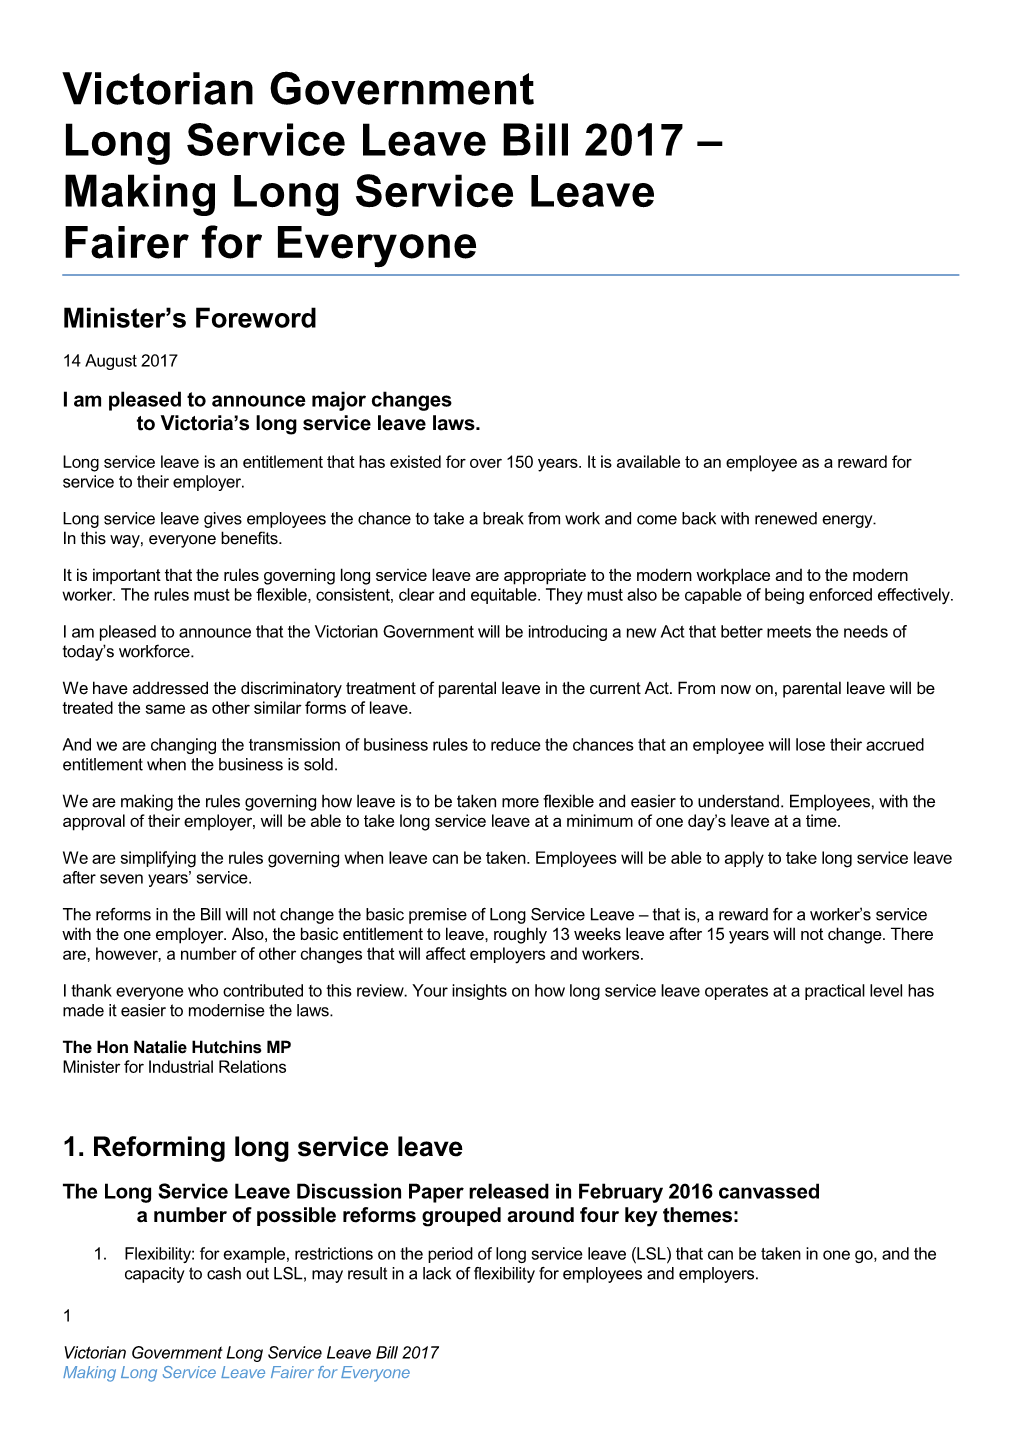 I Am Pleased to Announce Major Changesto Victoria S Long Service Leave Laws